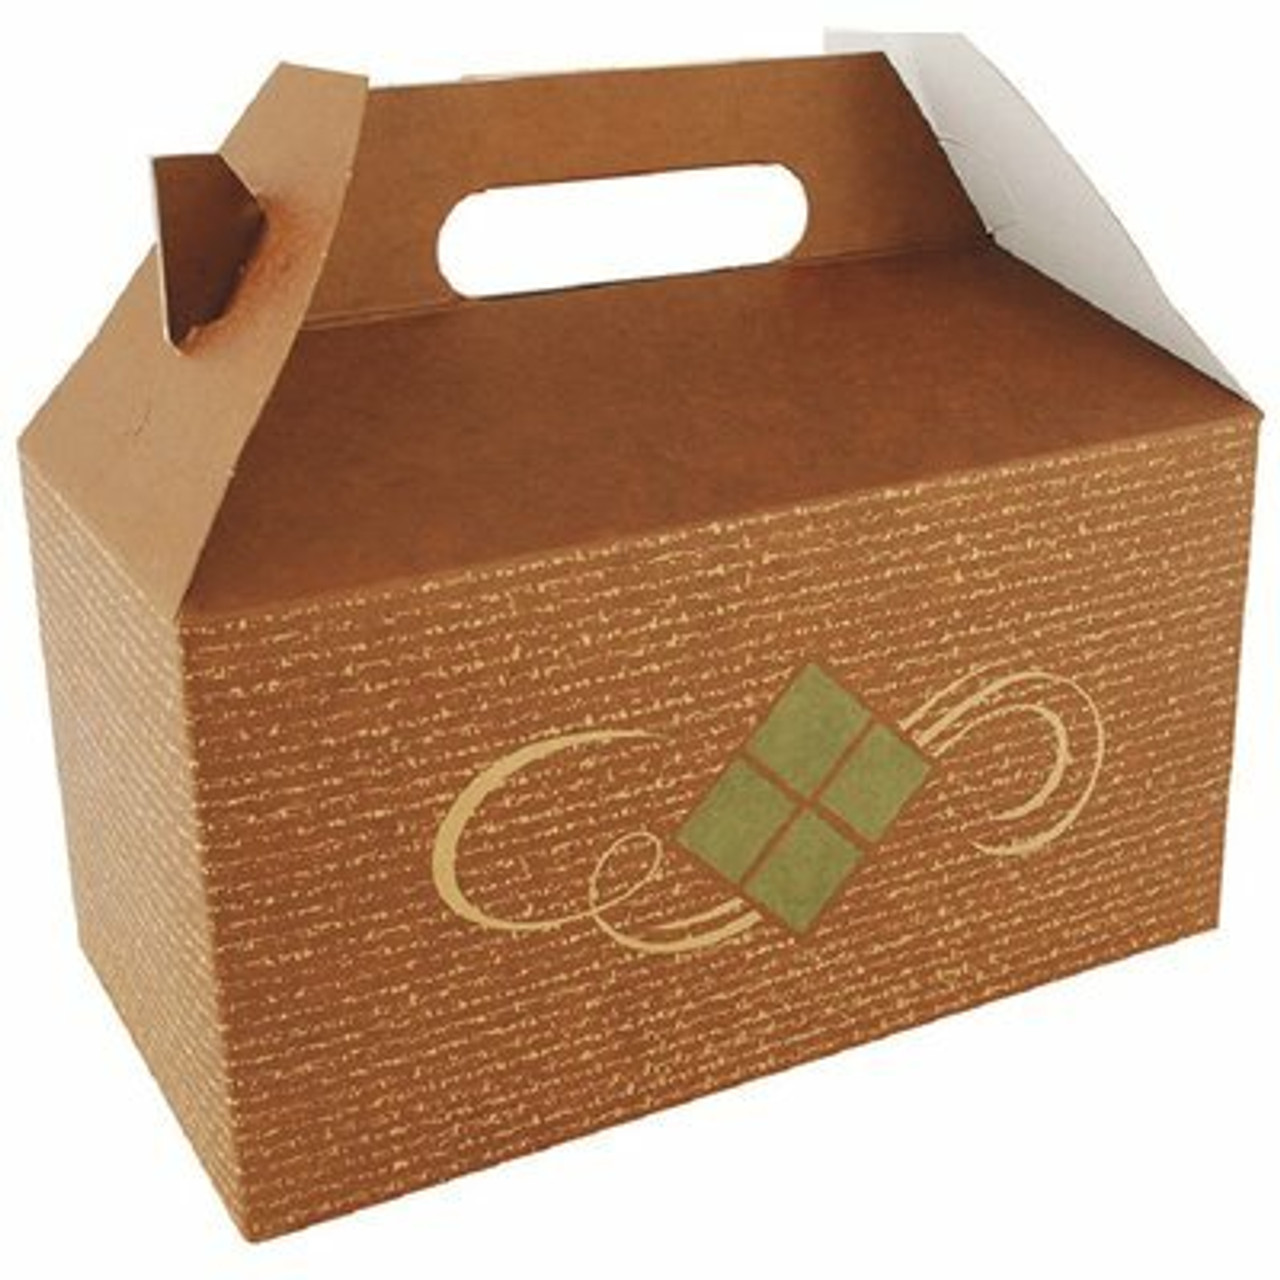 Southern Champion Tray Hearthstone Carry Out Barn Box W/Handle 9-1/2 X 5 X 5" (125 Per Case)